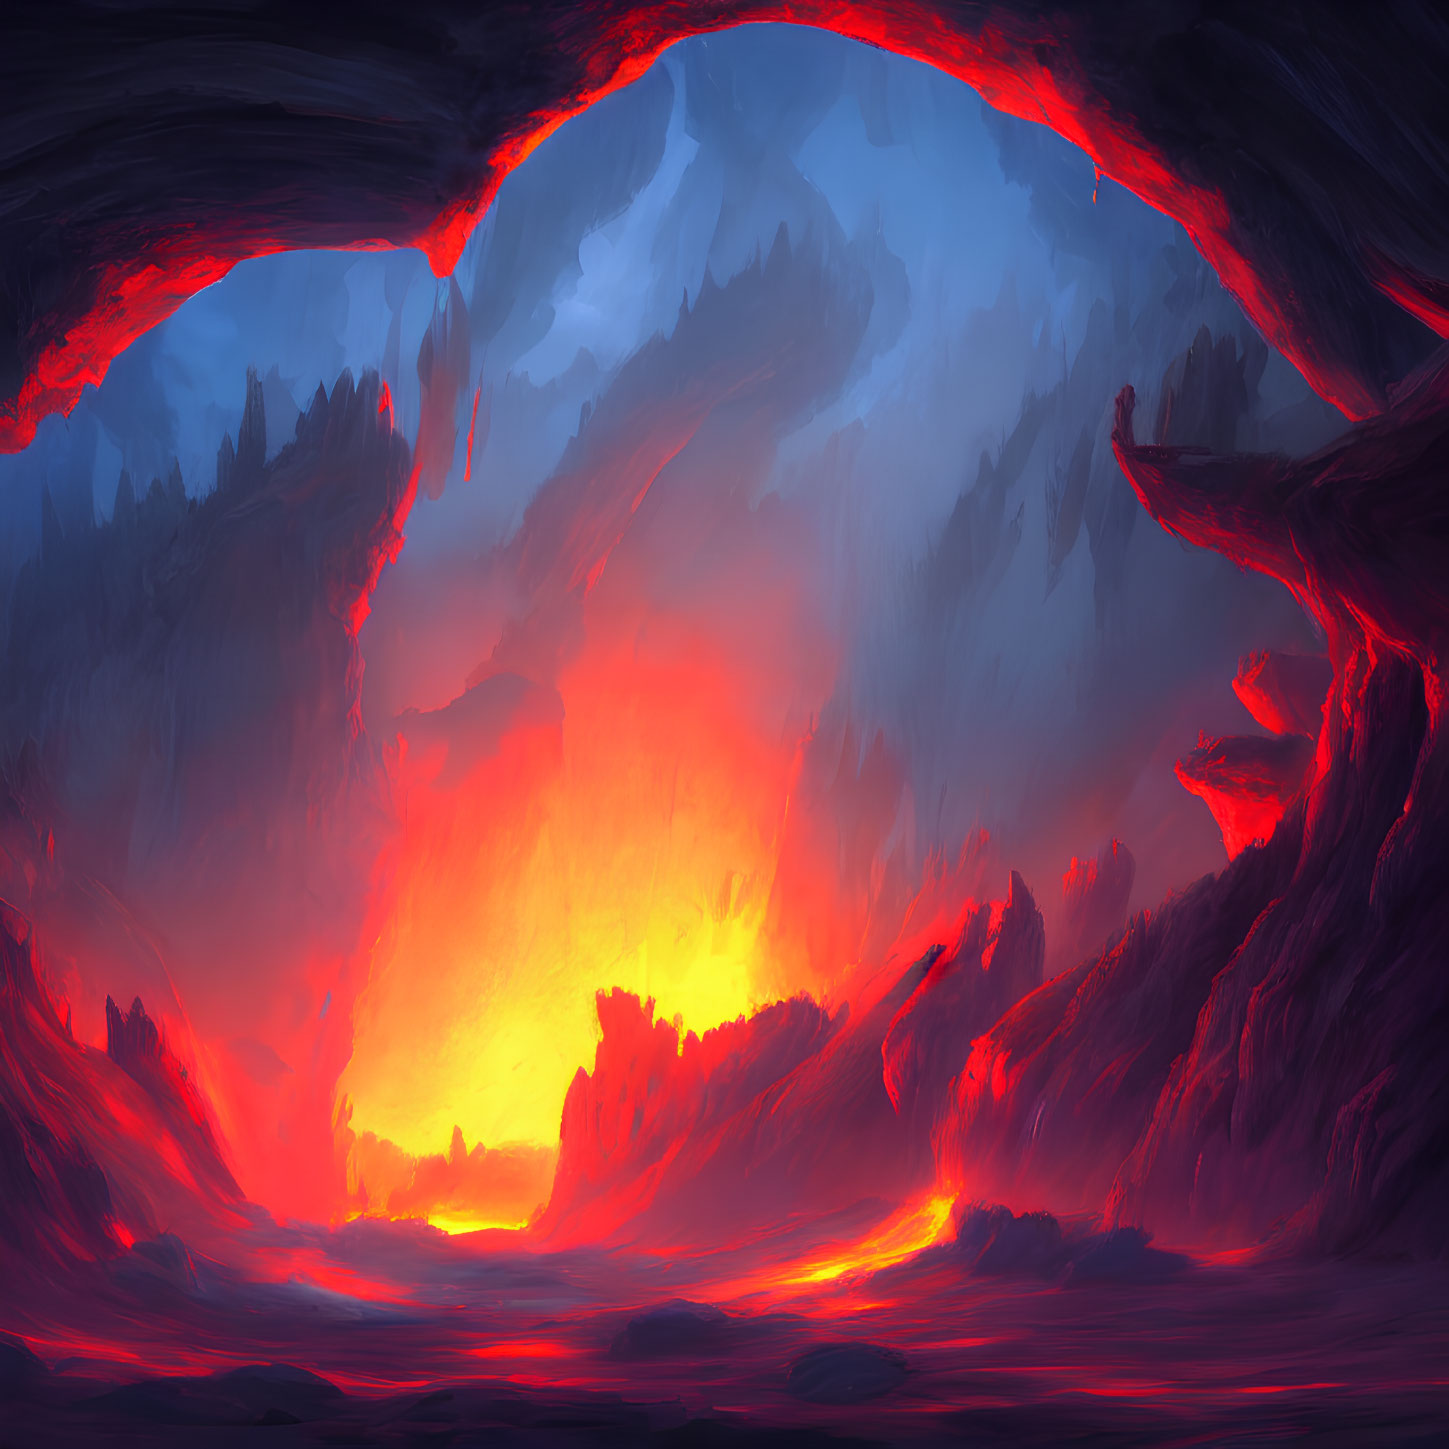 Volcanic landscape with fiery glow and heart-shaped cliffs